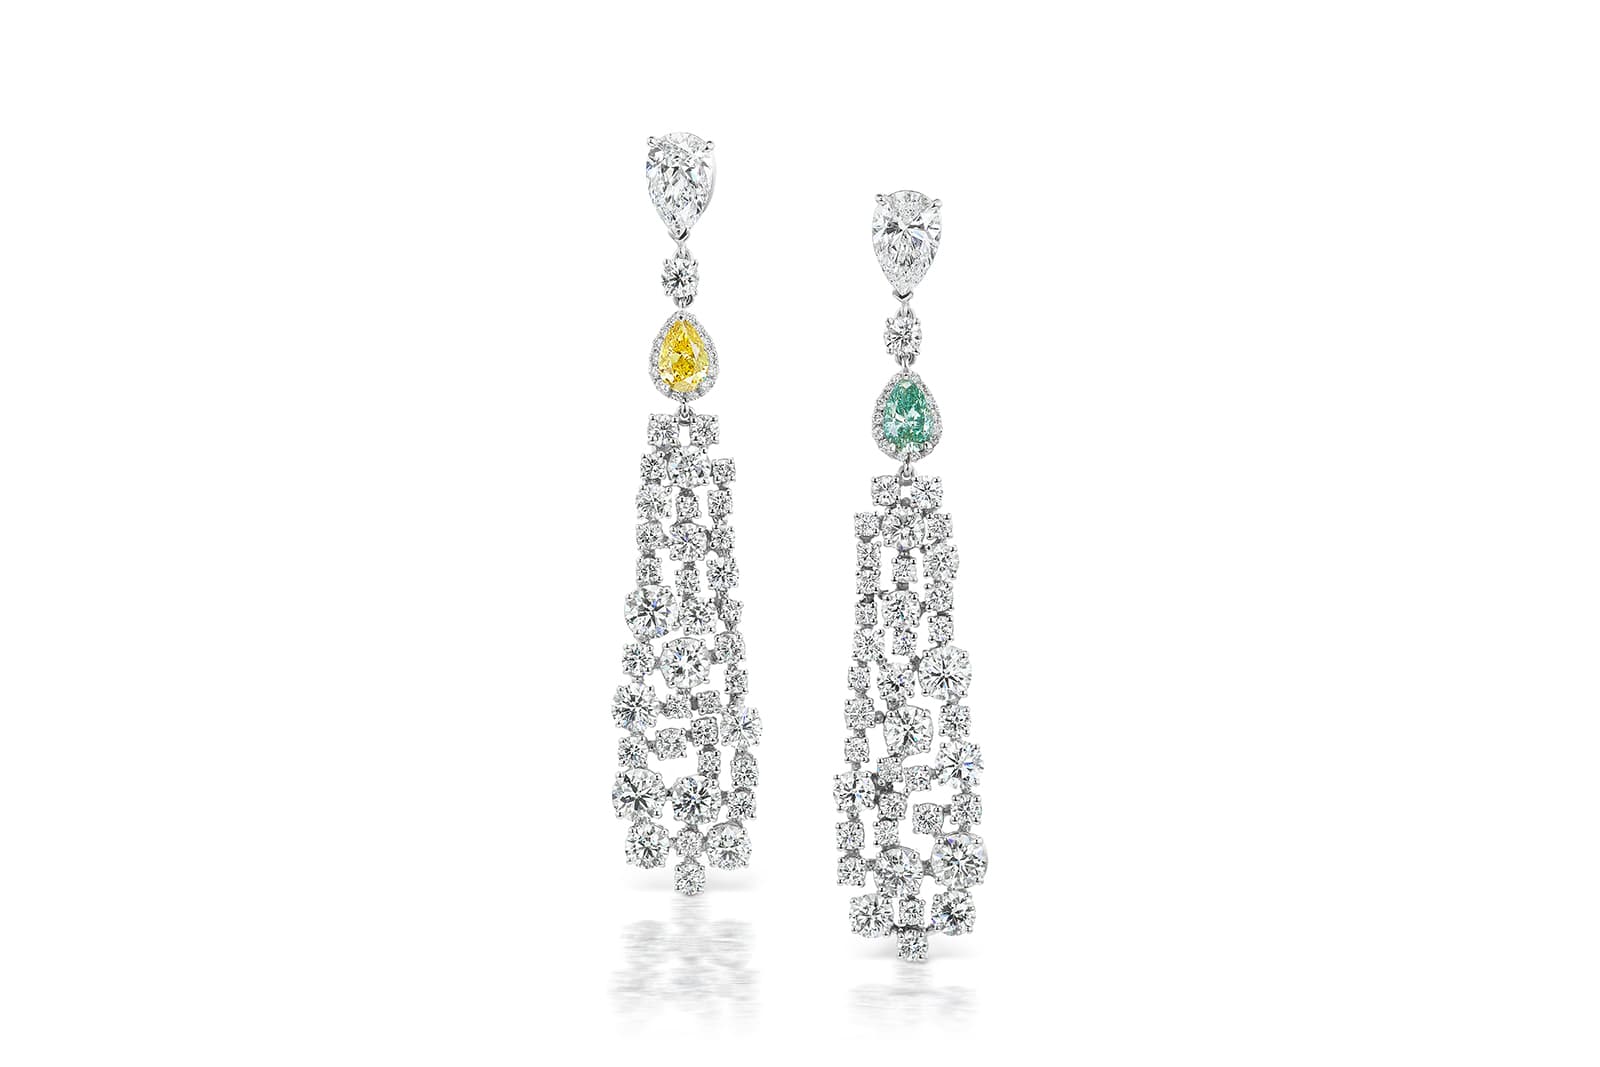 Maria Canale 'Drop' statement earrings with 0.62ct blue-green pear cut diamond and  0.60ct pear cut fancy vivid IF yellow diamond, and a total of 10.07ct colourless diamonds in 18k white gold